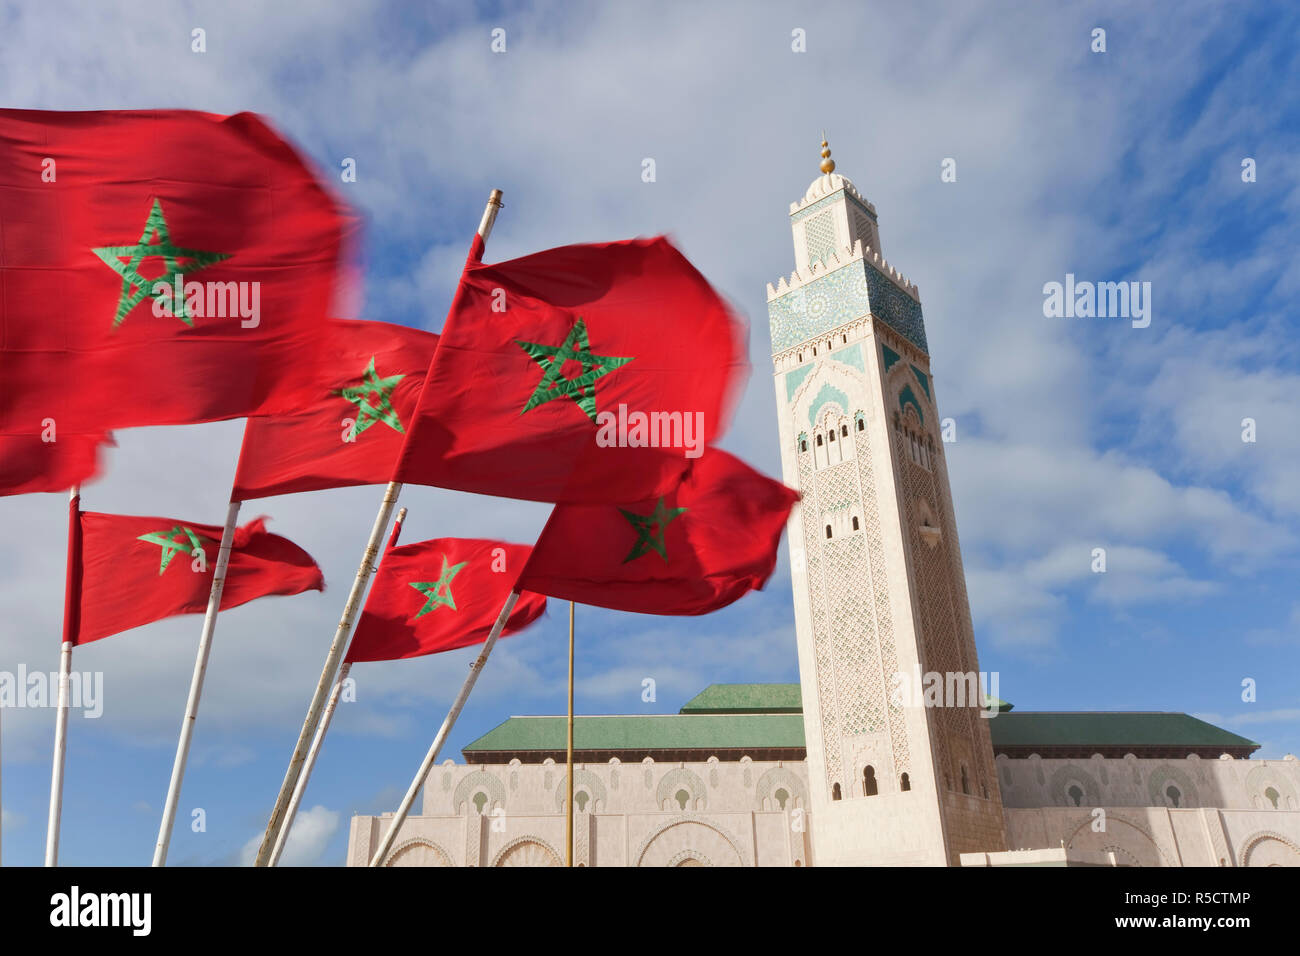 Flags of Morocco waving in the wind and Hassan II Mosque, the third largest mosque in the world, Casablanca, Morocco, North Africa Stock Photo